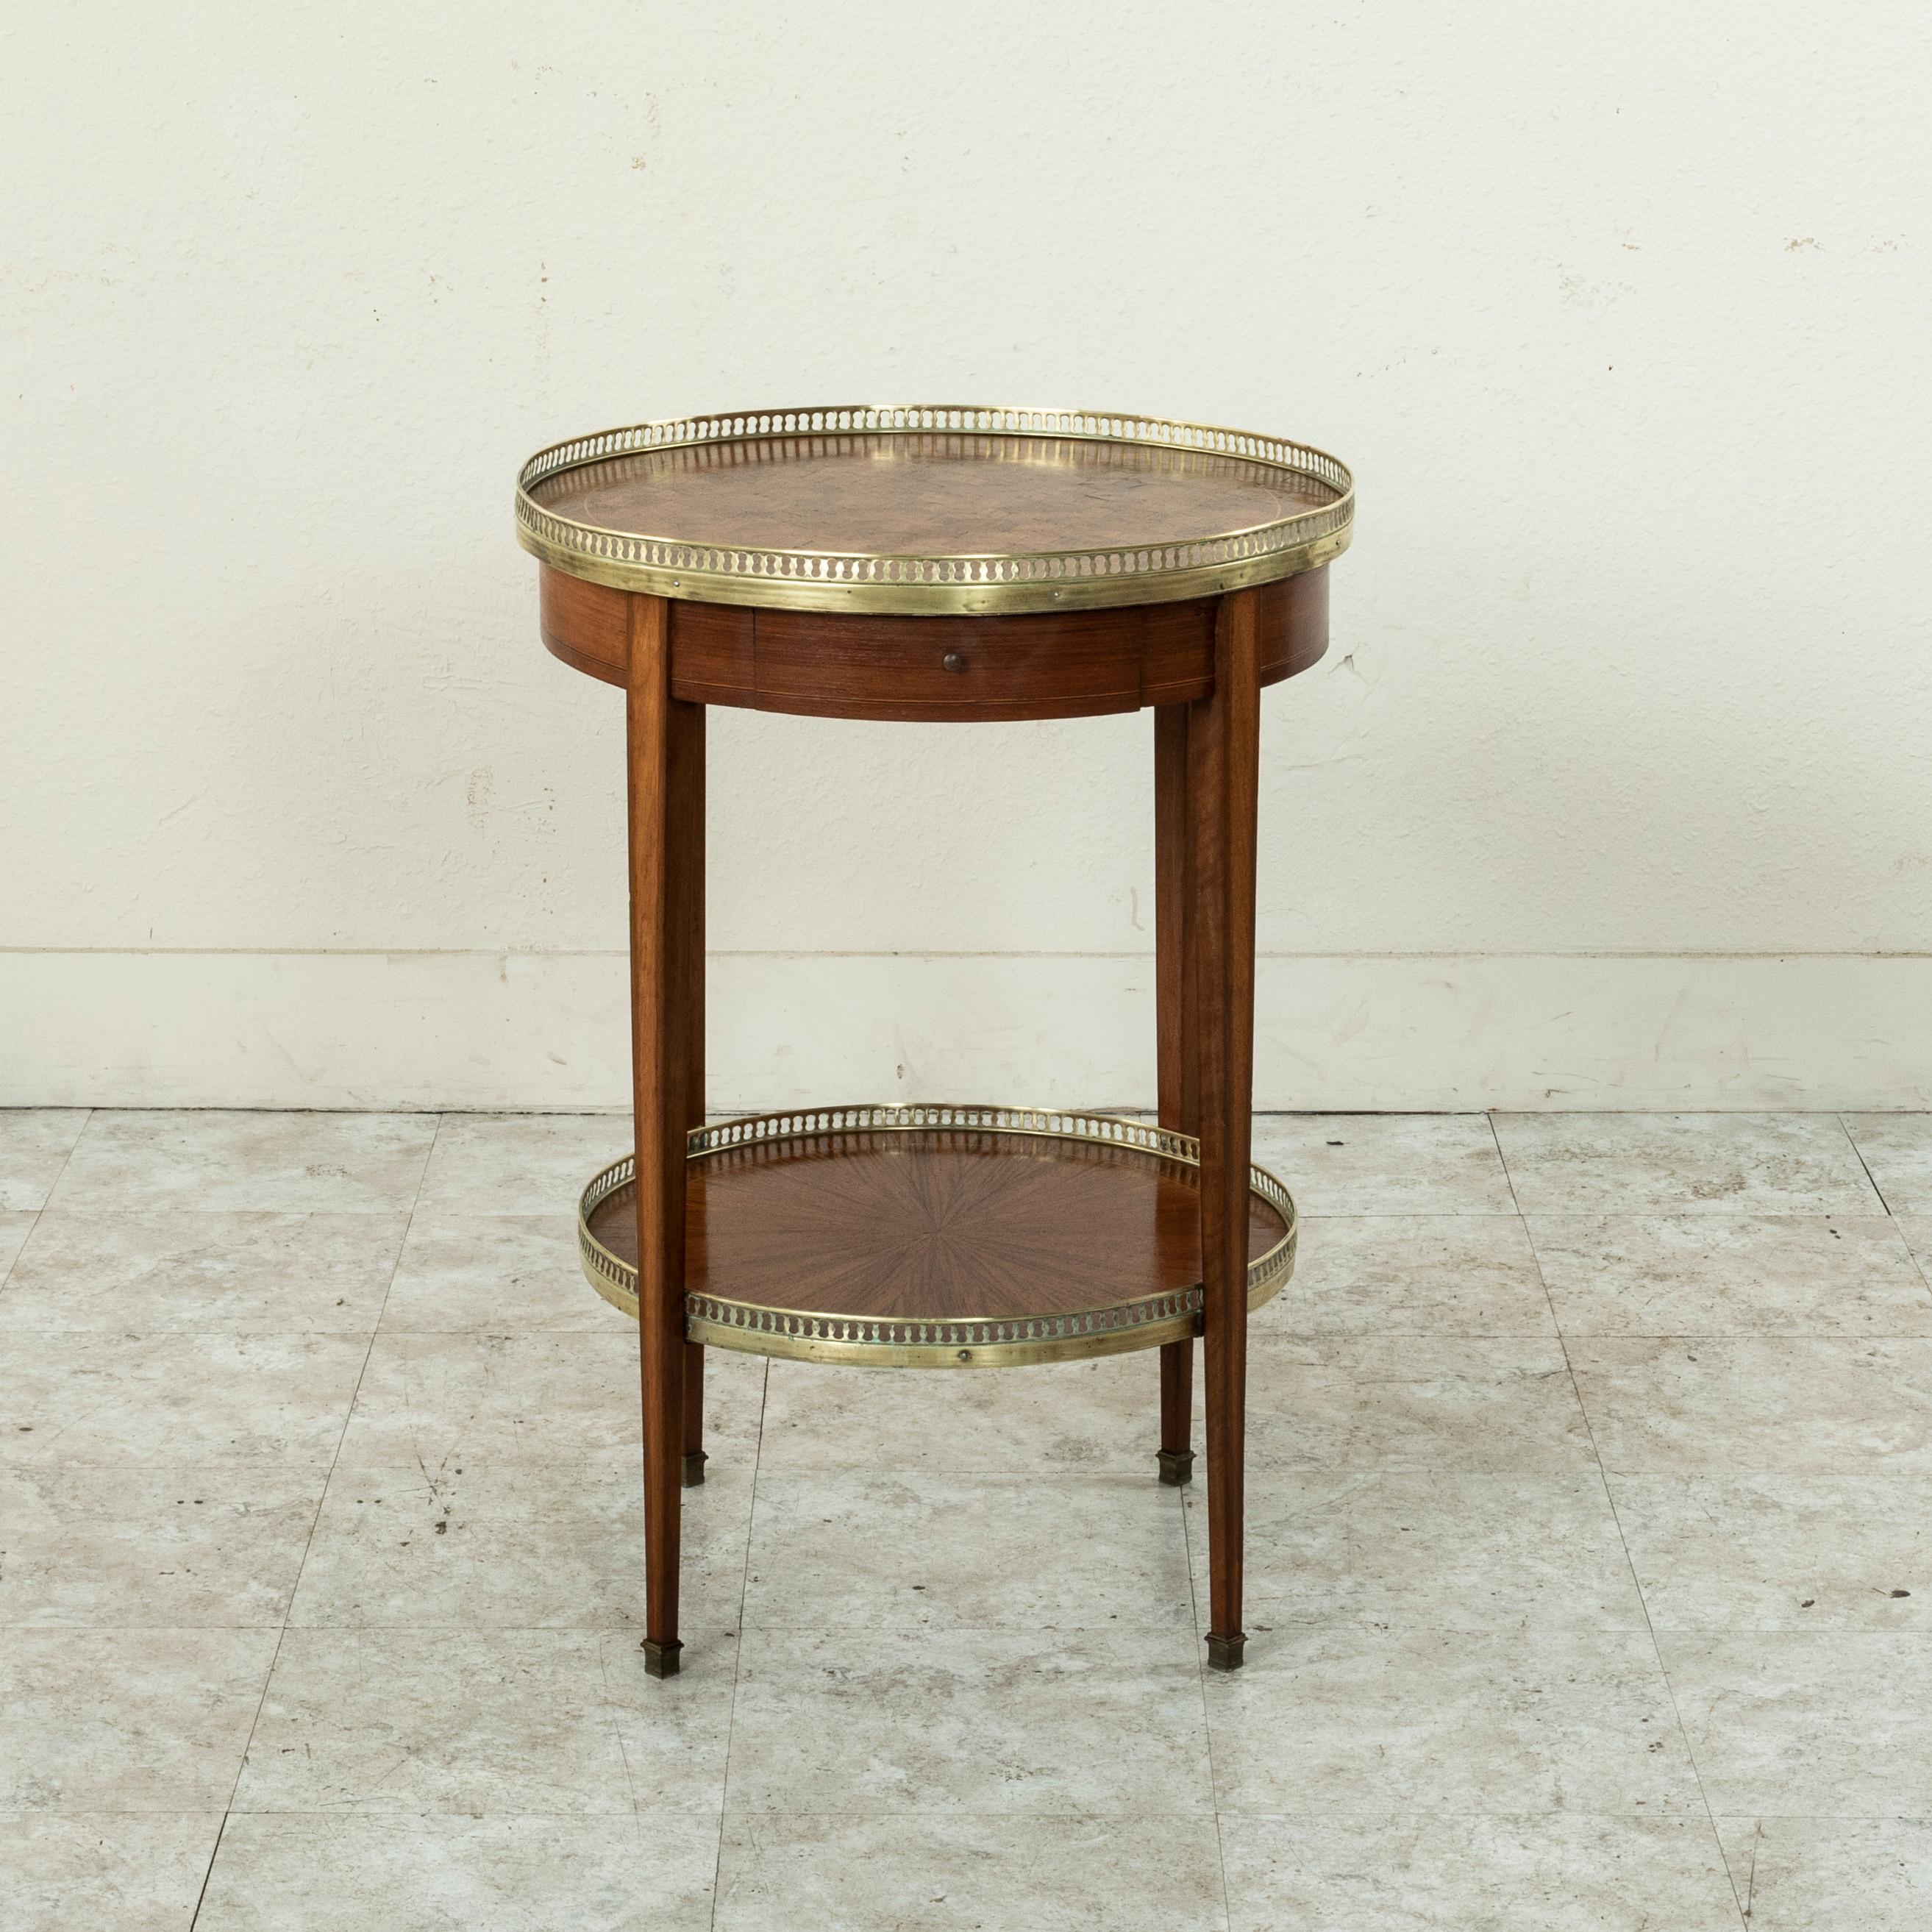 This late nineteenth century French gueridon or side table in the Louis XVI style features an inlaid rosewood top in a geometric pattern surrounded by a pierced bronze gallery. The apron is fitted with a single drawer and is detailed with fine lines